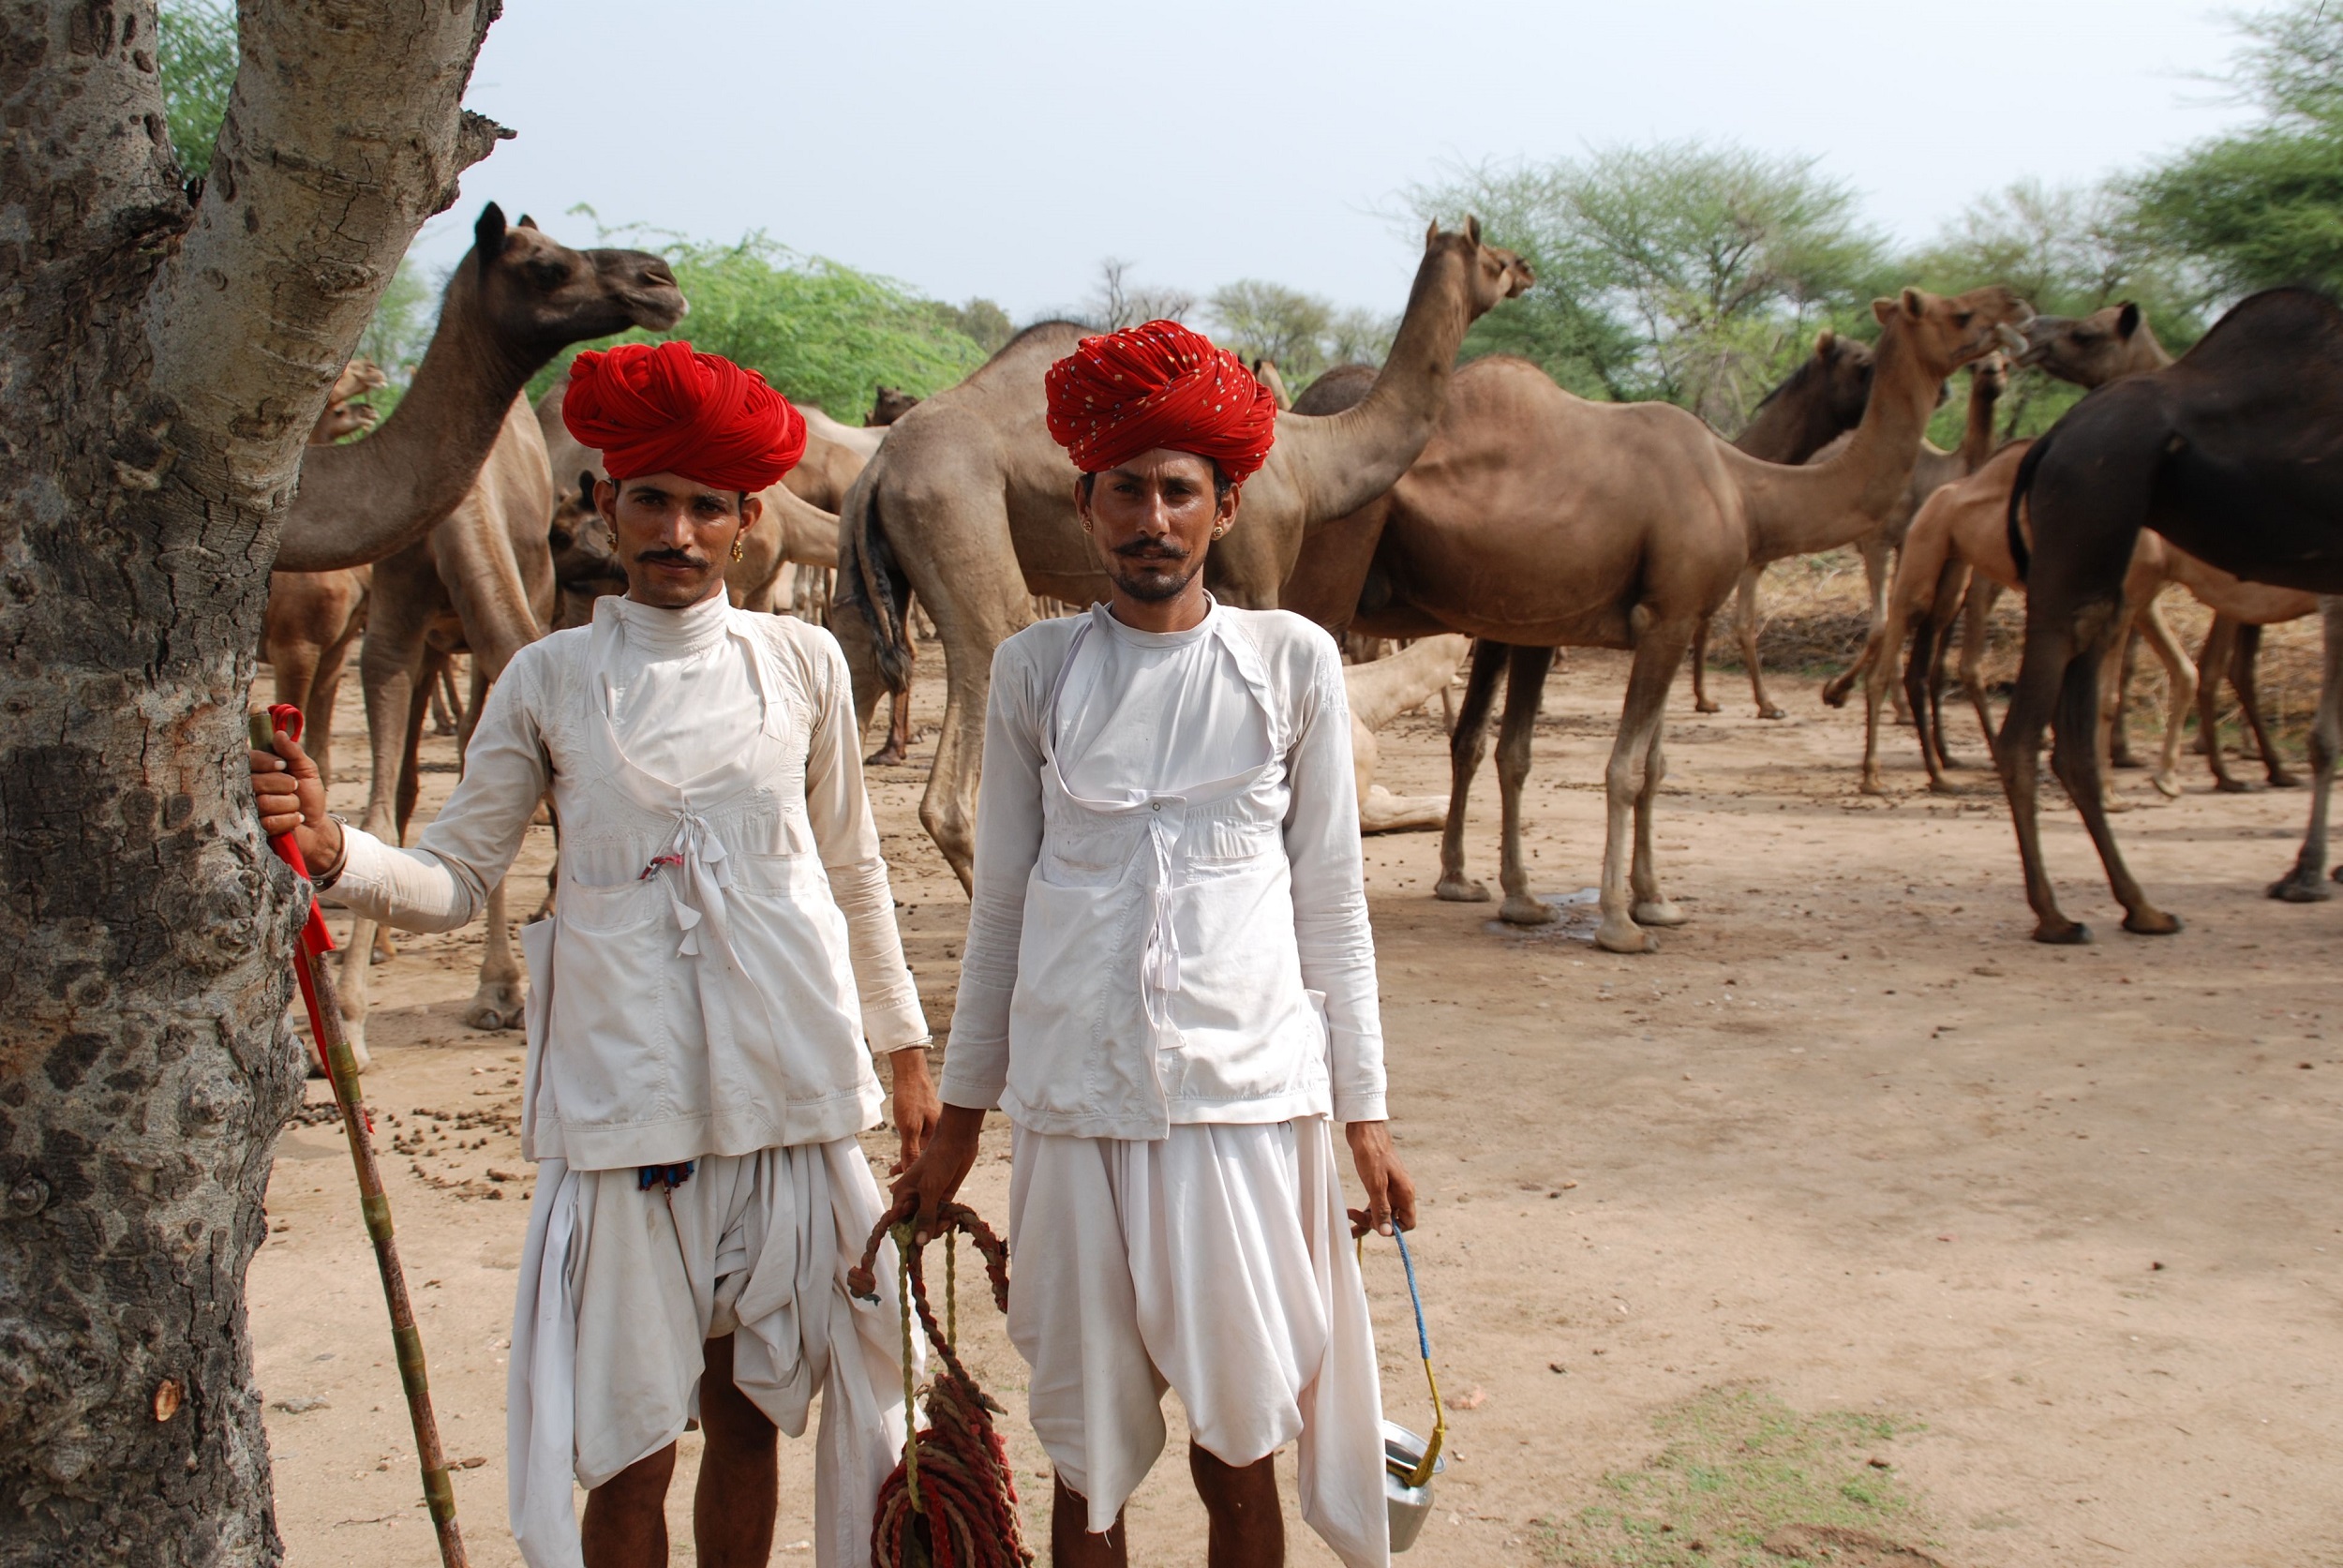  Two pastoralists stand in front of camels. Adaptive practices of pastoralists rarely make it into the books of "official knowledge" [image by: Ilse Köhler-Rollefson]